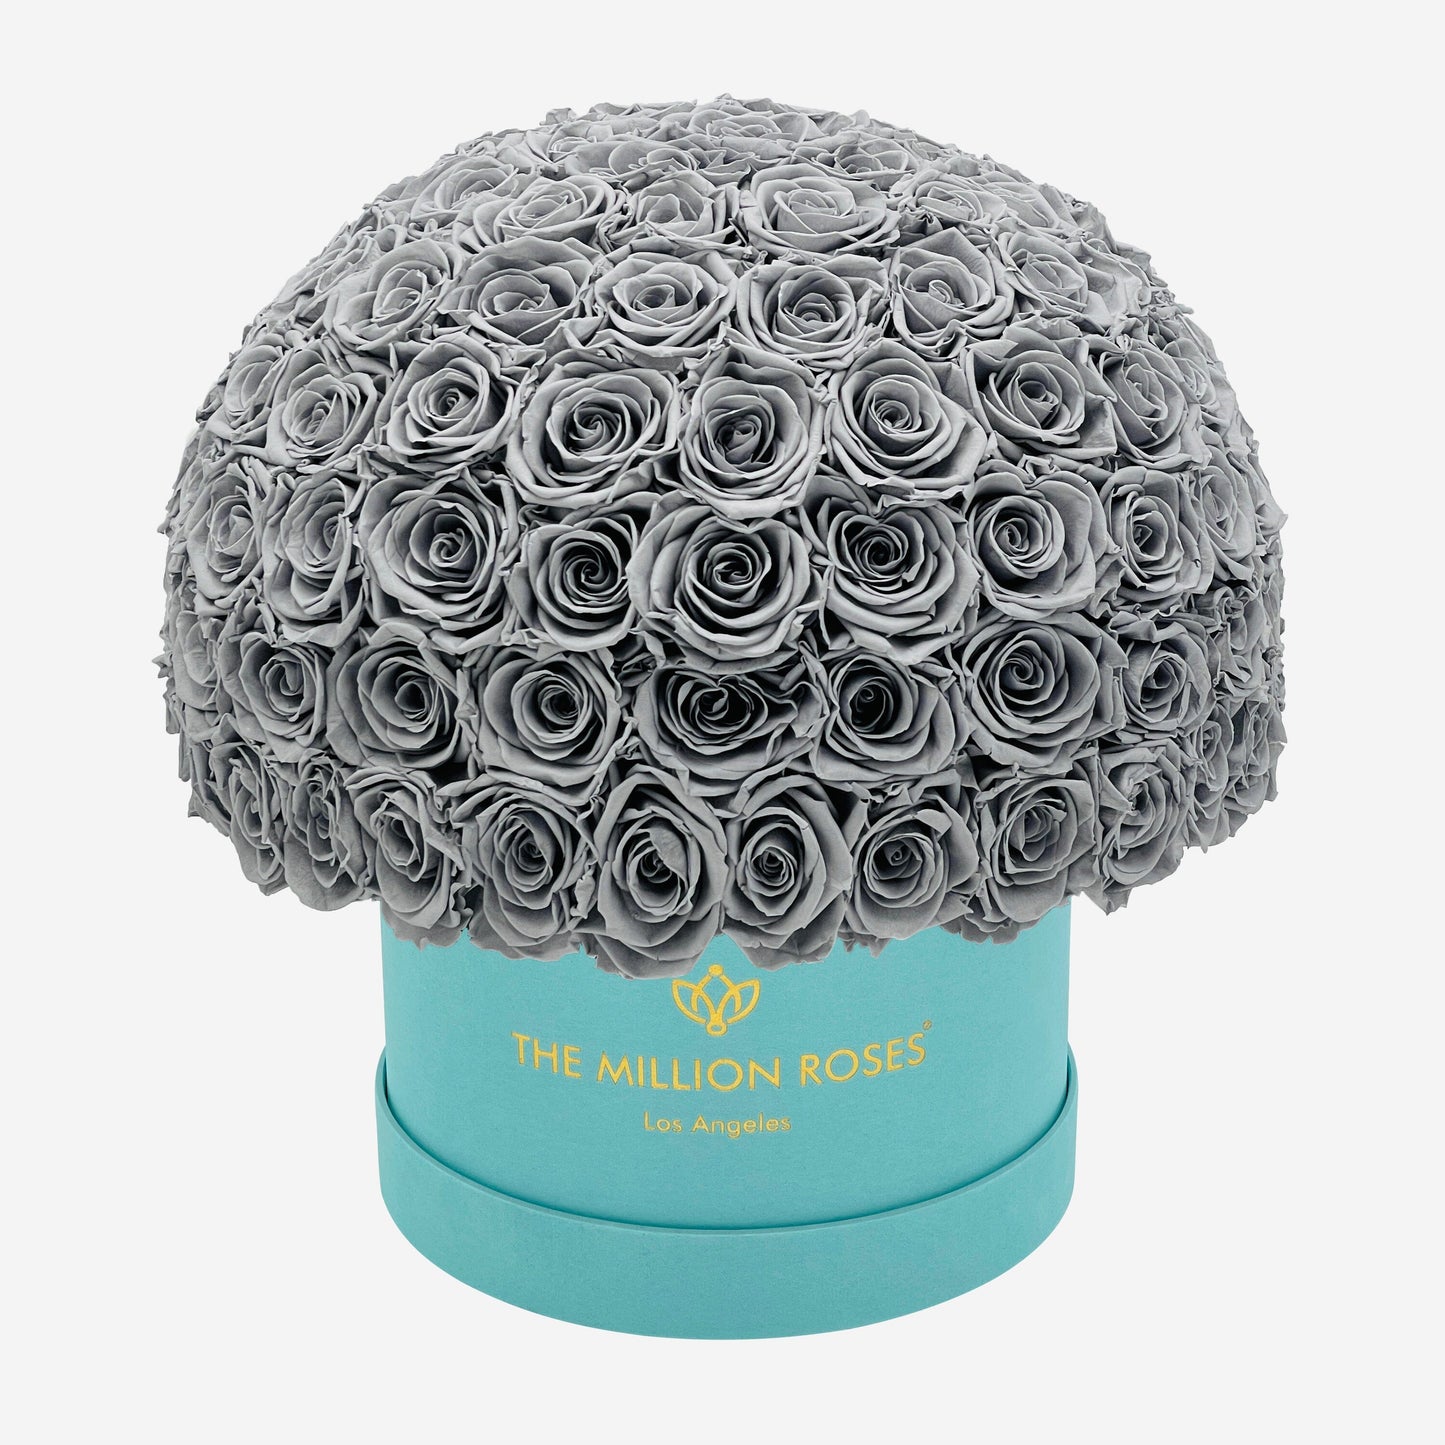 Supreme Mint Green Suede Superdome Box | Pastel Grey Roses - The Million Roses